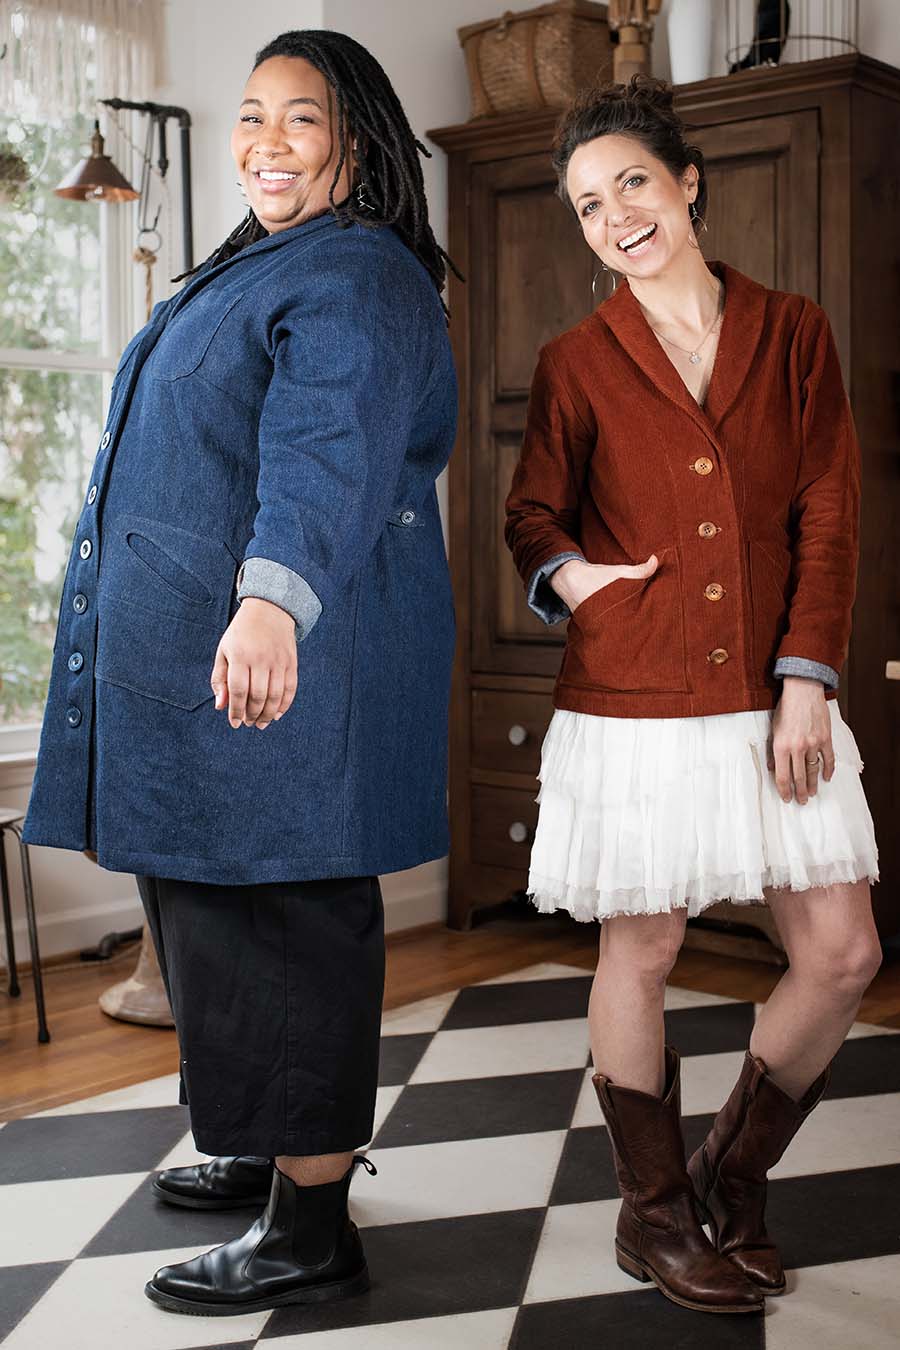 Ashley wears a denim sylvan jacket, standing next to Meg who wear a red corduroy sylvan jacket. They are in Meg's sewing studio. They're both smiling.